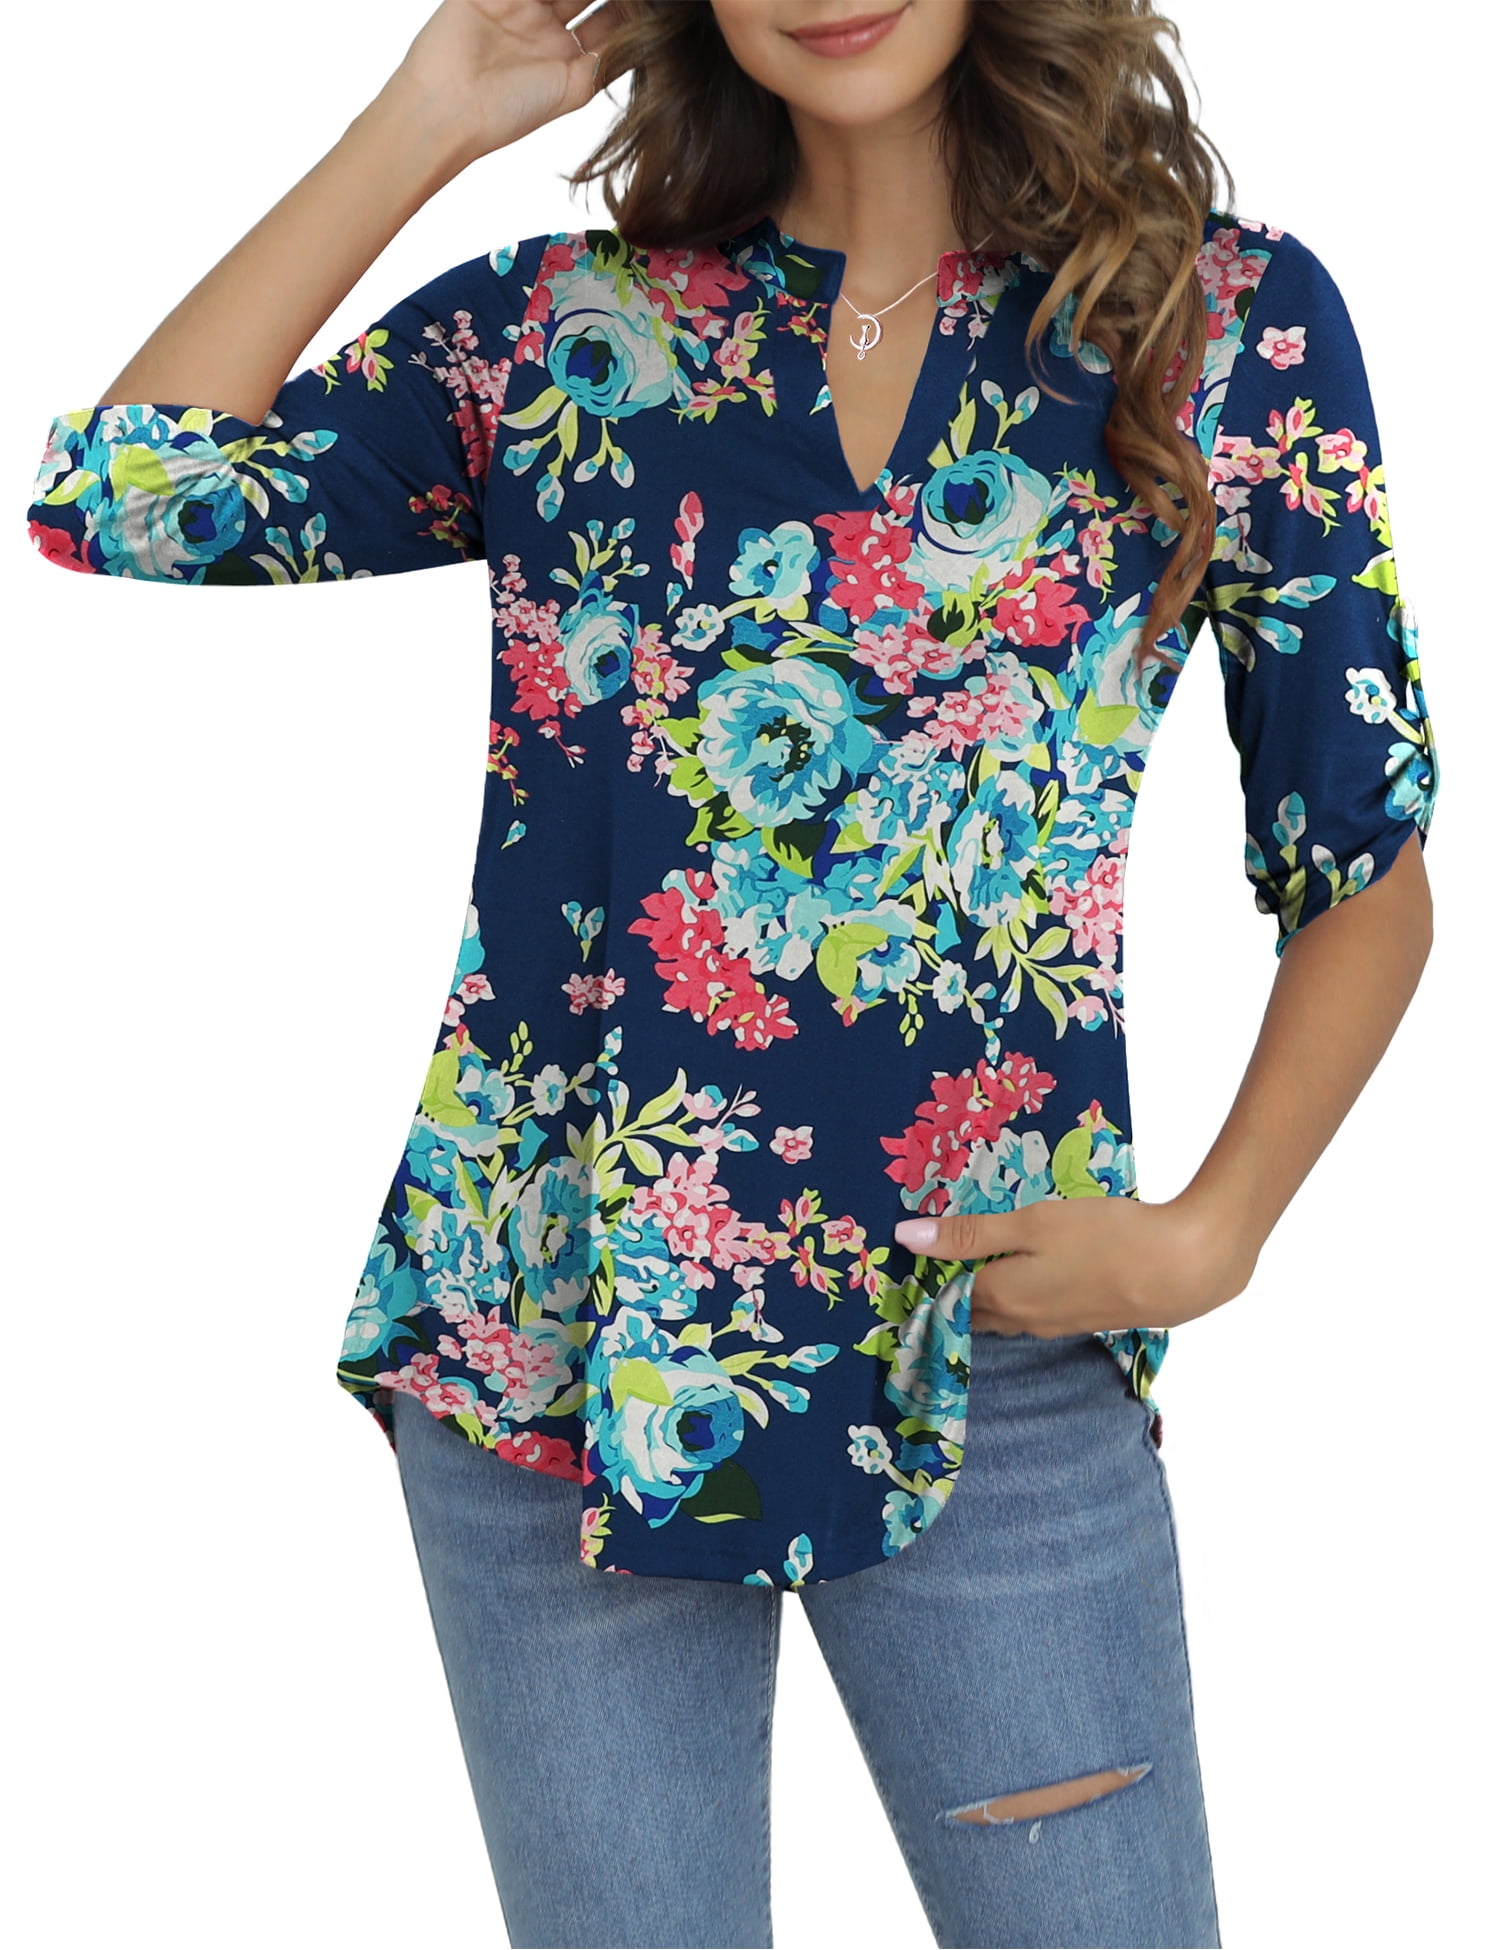 LETDIOSTO Womens Plus Size Shirts 3/4 Roll Sleeve V Neck Floral Flowy ...